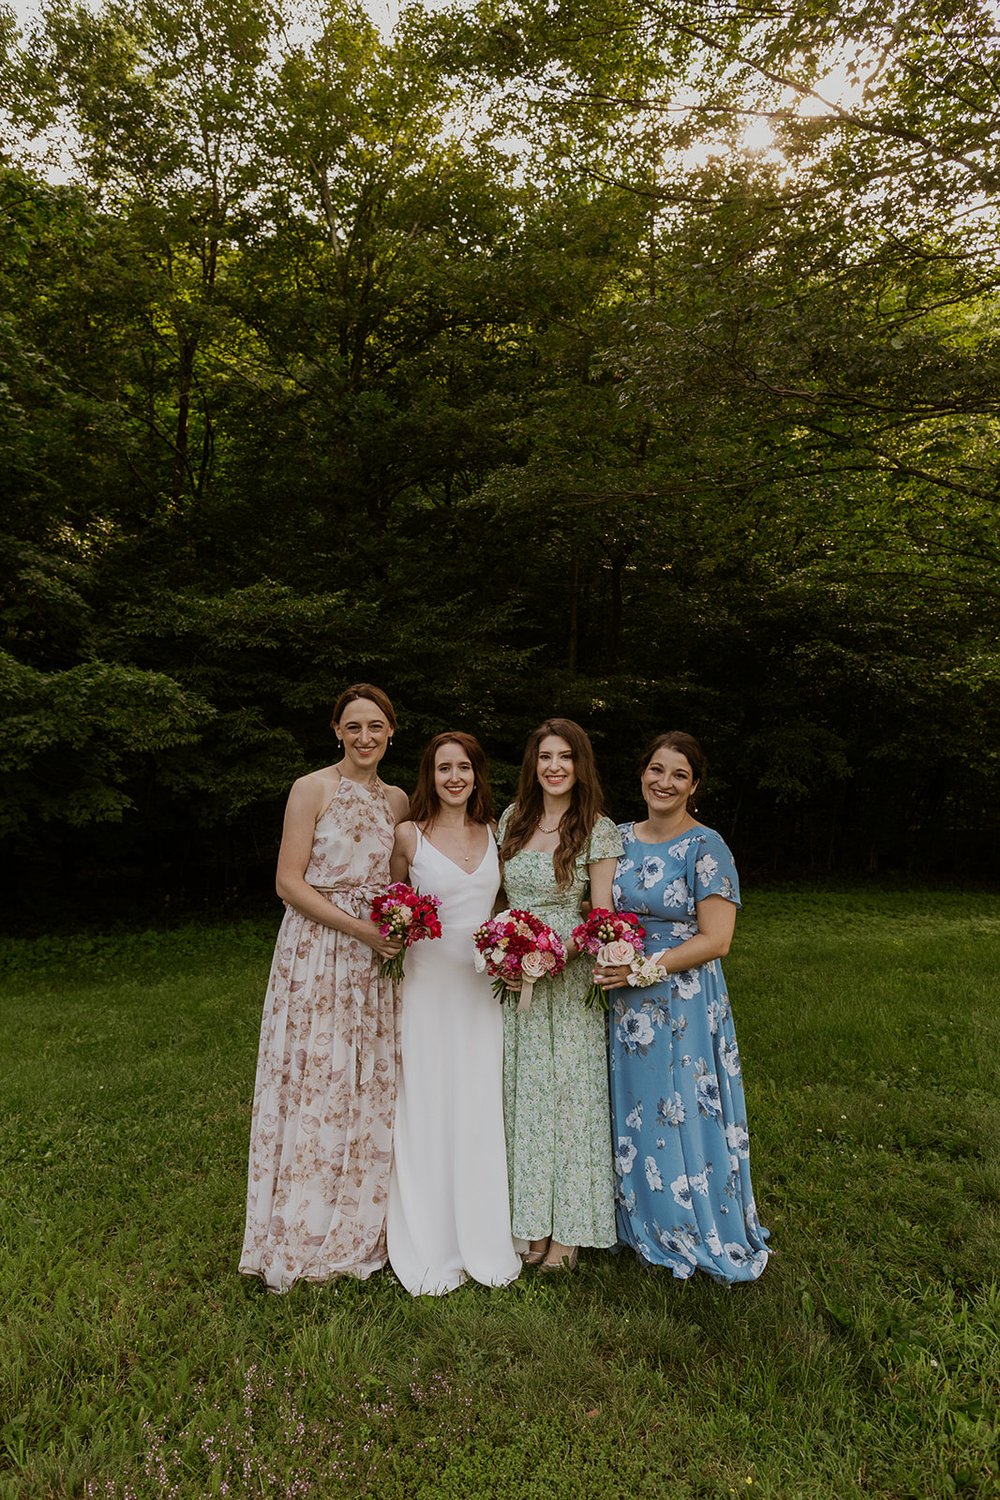 Bridesmaids pose together with smiles.